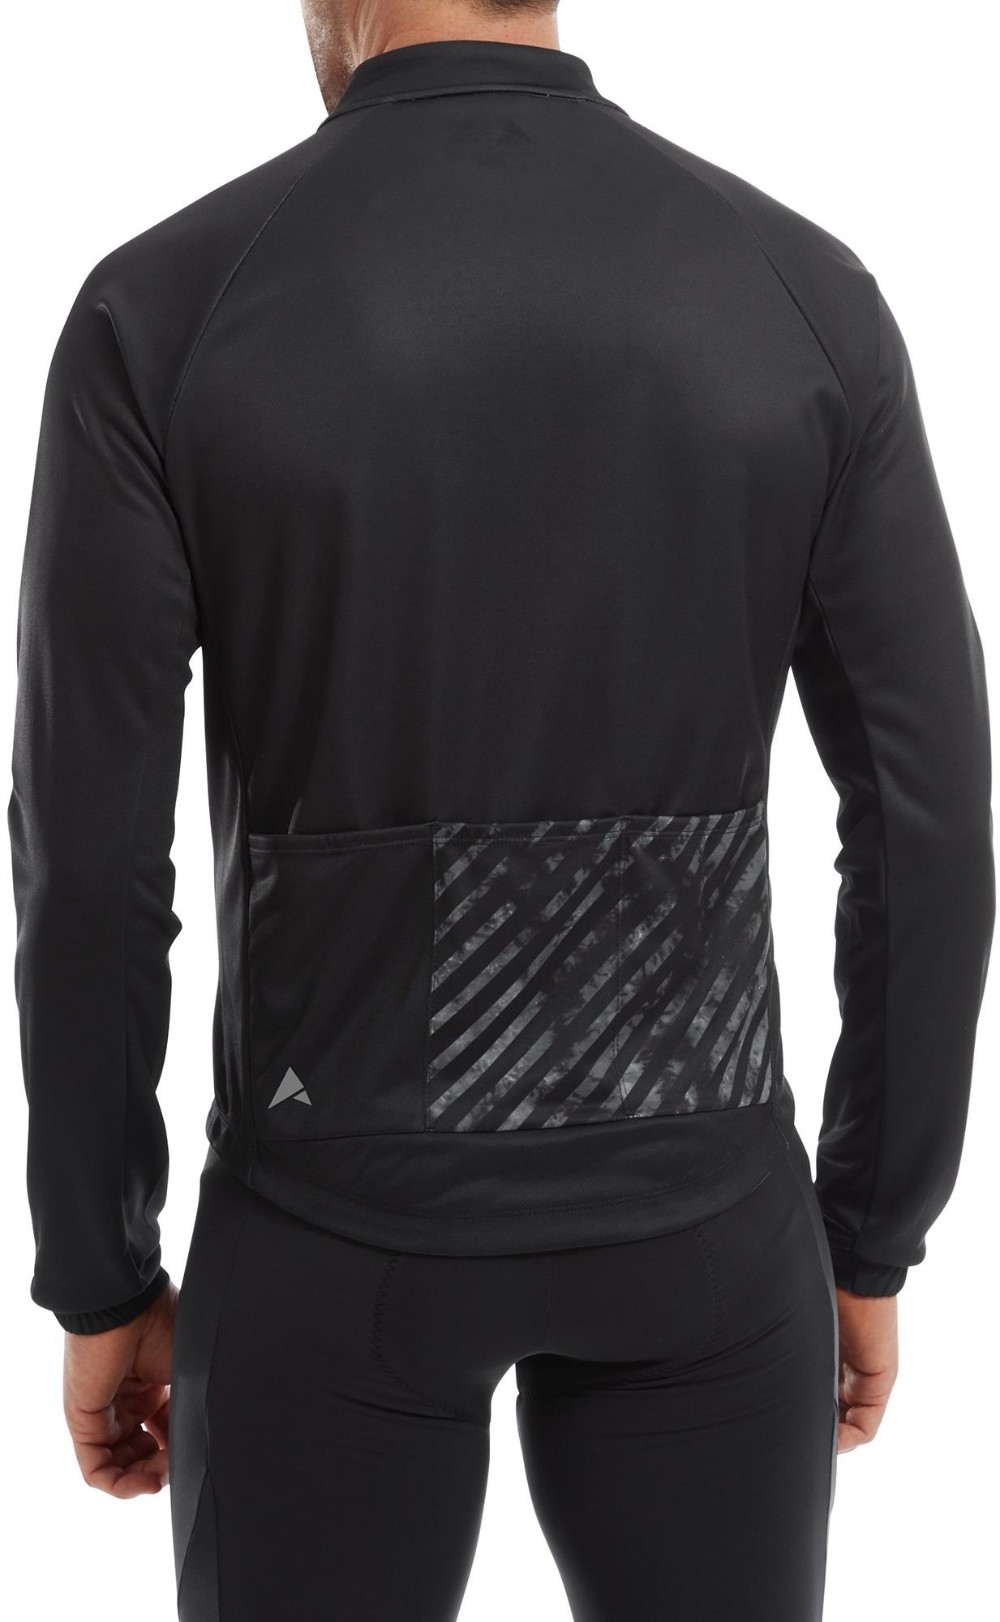 Airstream Long Sleeve Jersey image 1